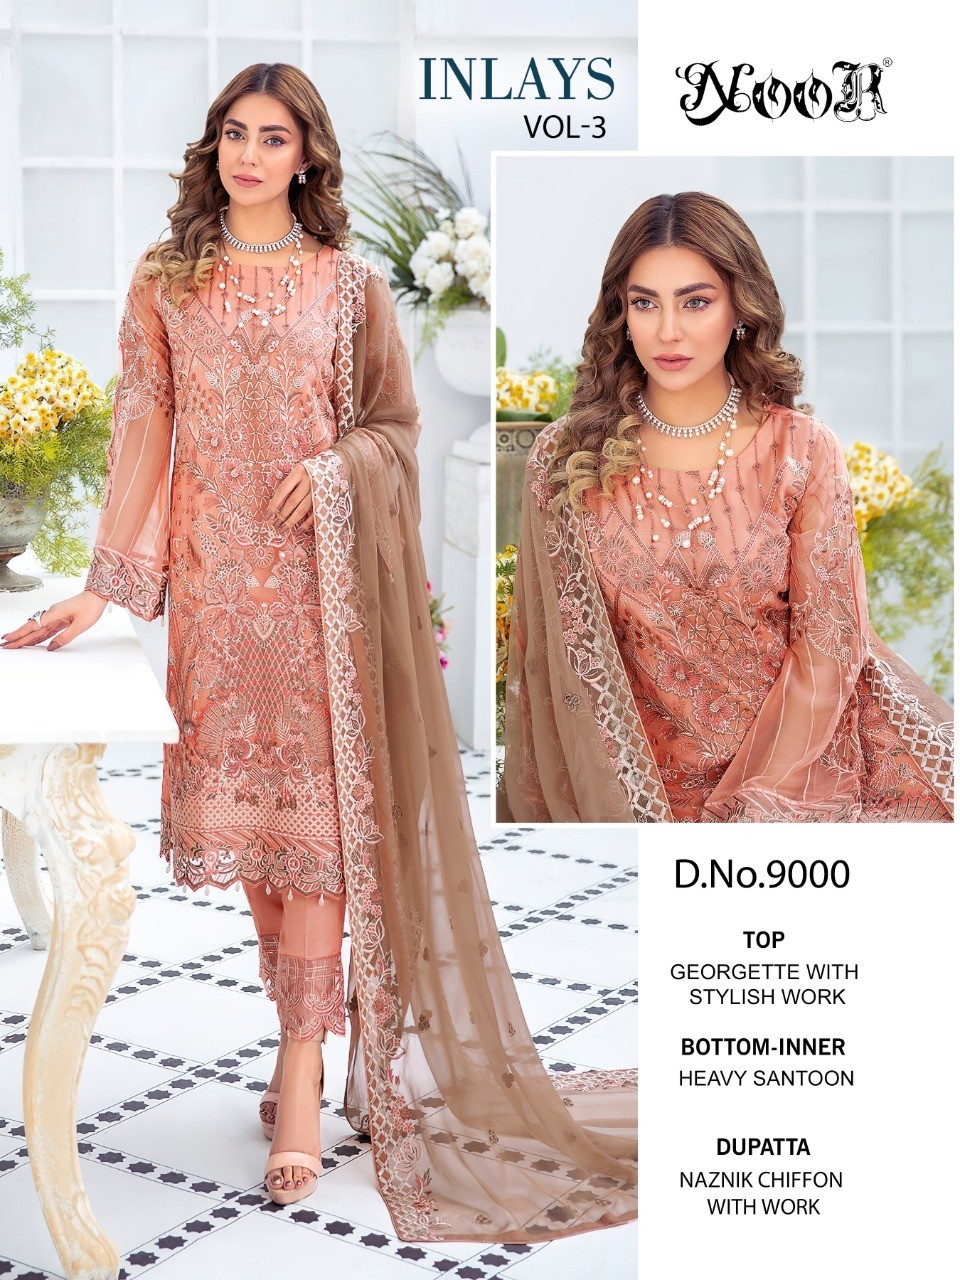 NOOR INLAYS VOL 3 9000 TO 9003 PAKISTANI SUITS BY SINGLE